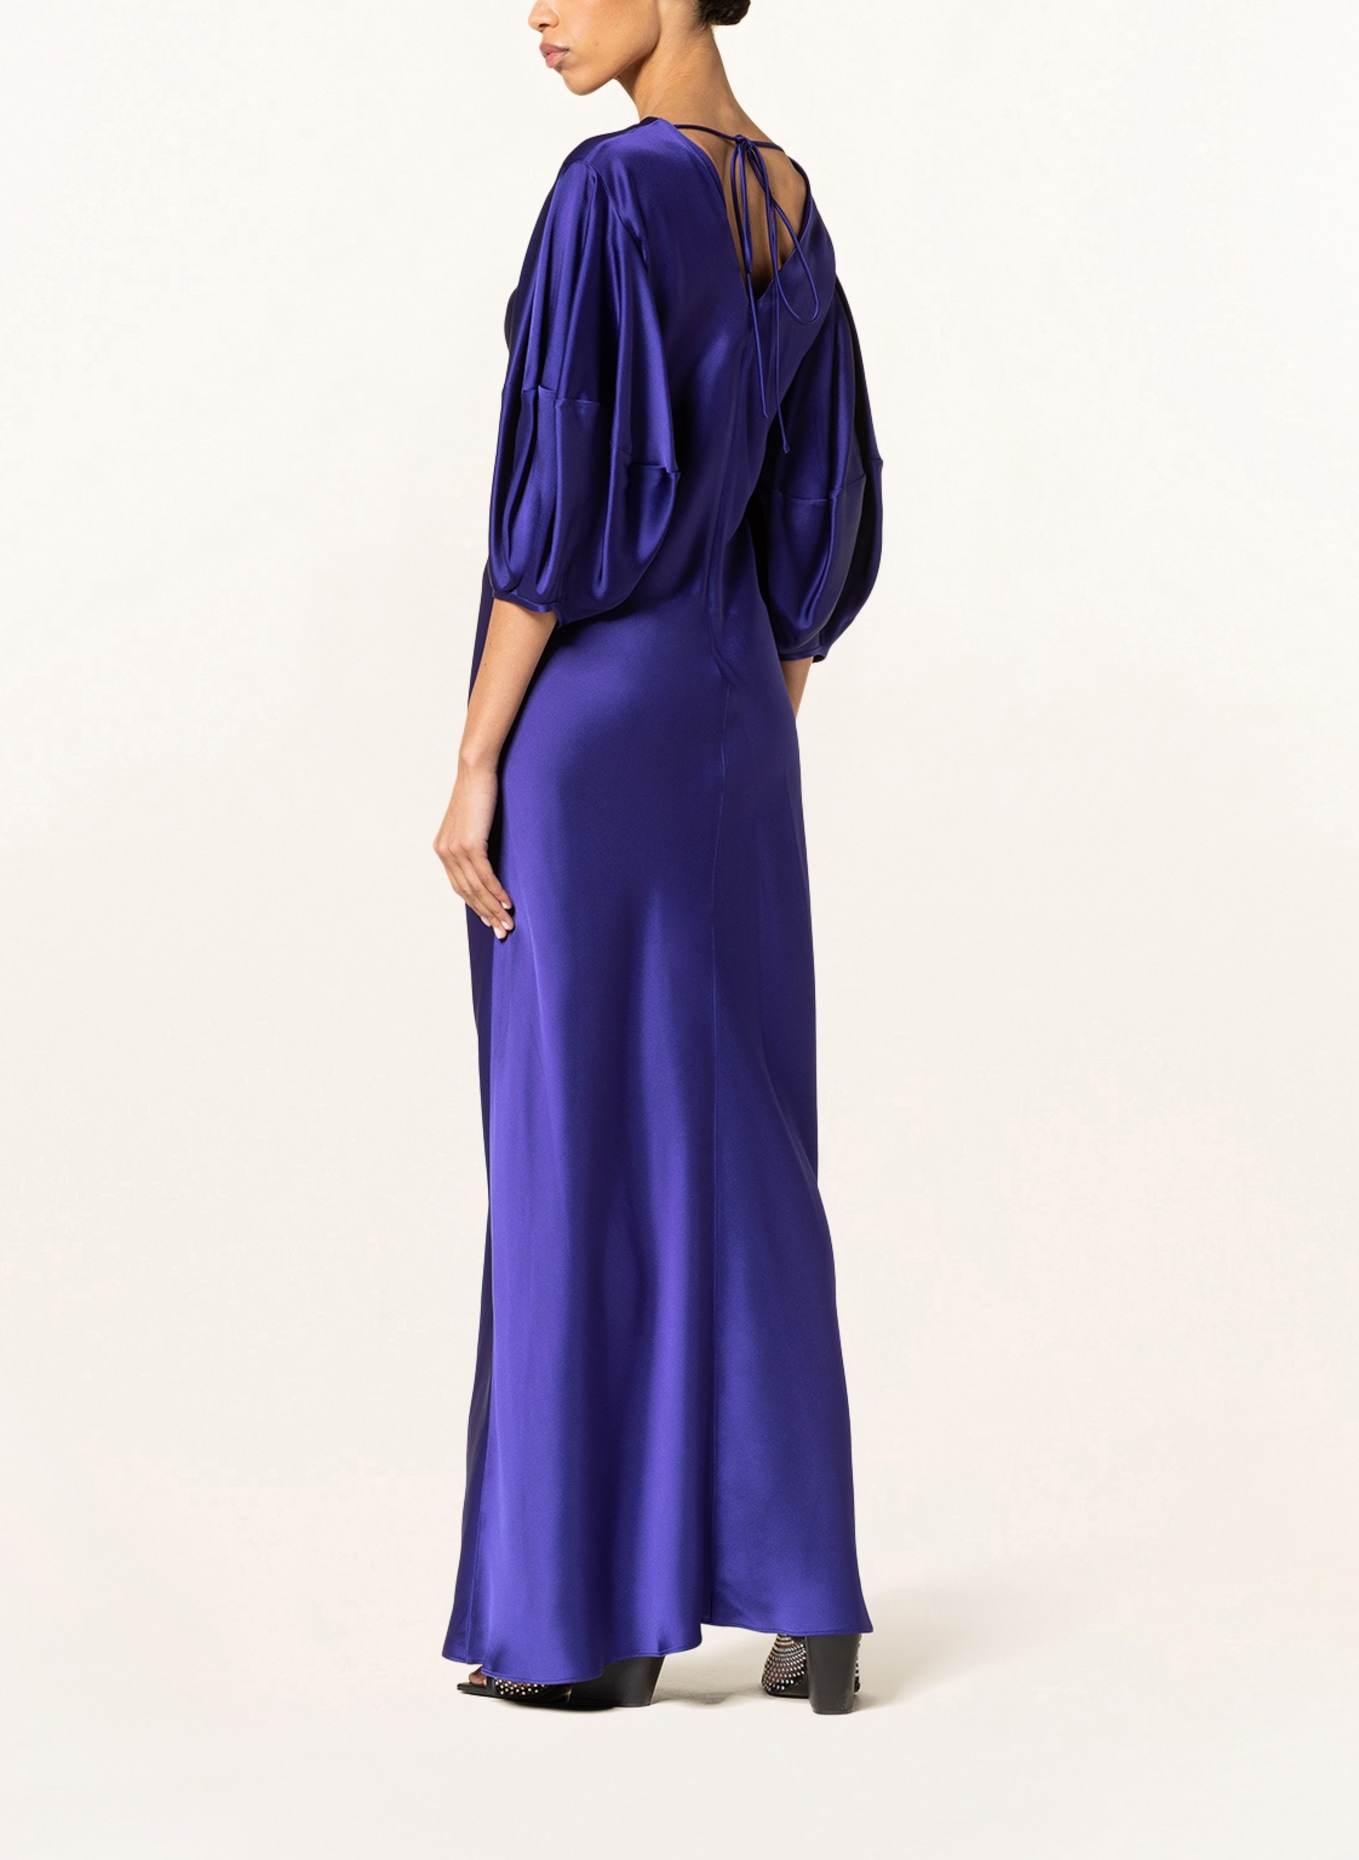 STELLA McCARTNEY Satin dress with 3/4 sleeves, Color: PURPLE (Image 3)